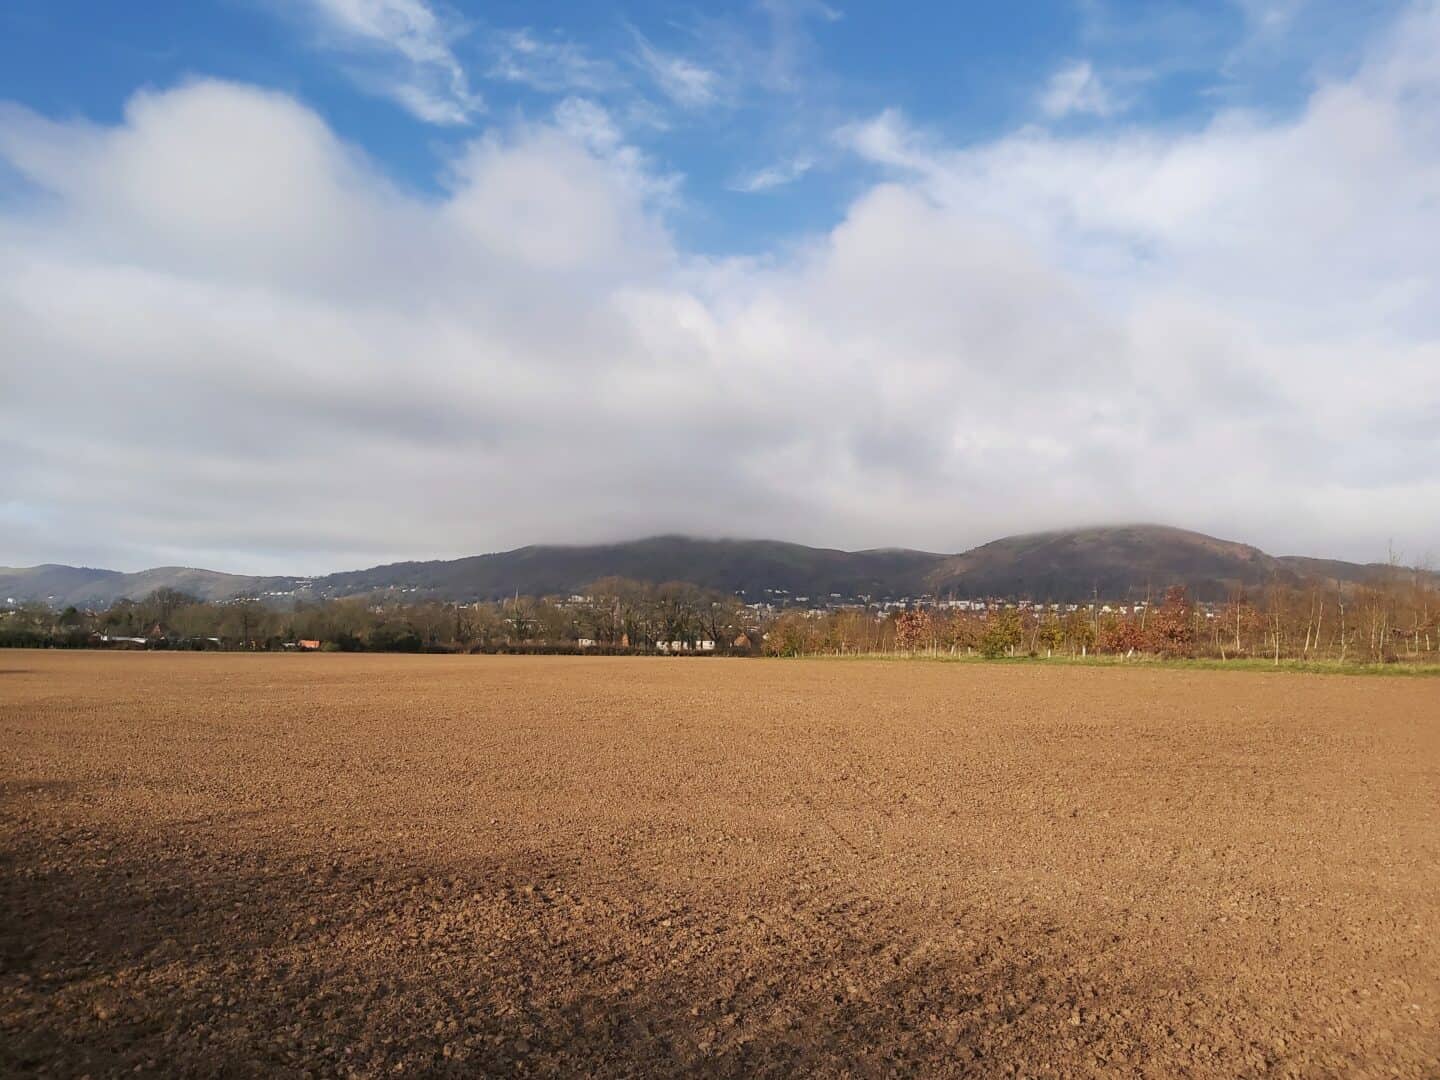 Ploughed field with Malvern Hills in the background. The tops of the hills are in cloud. 